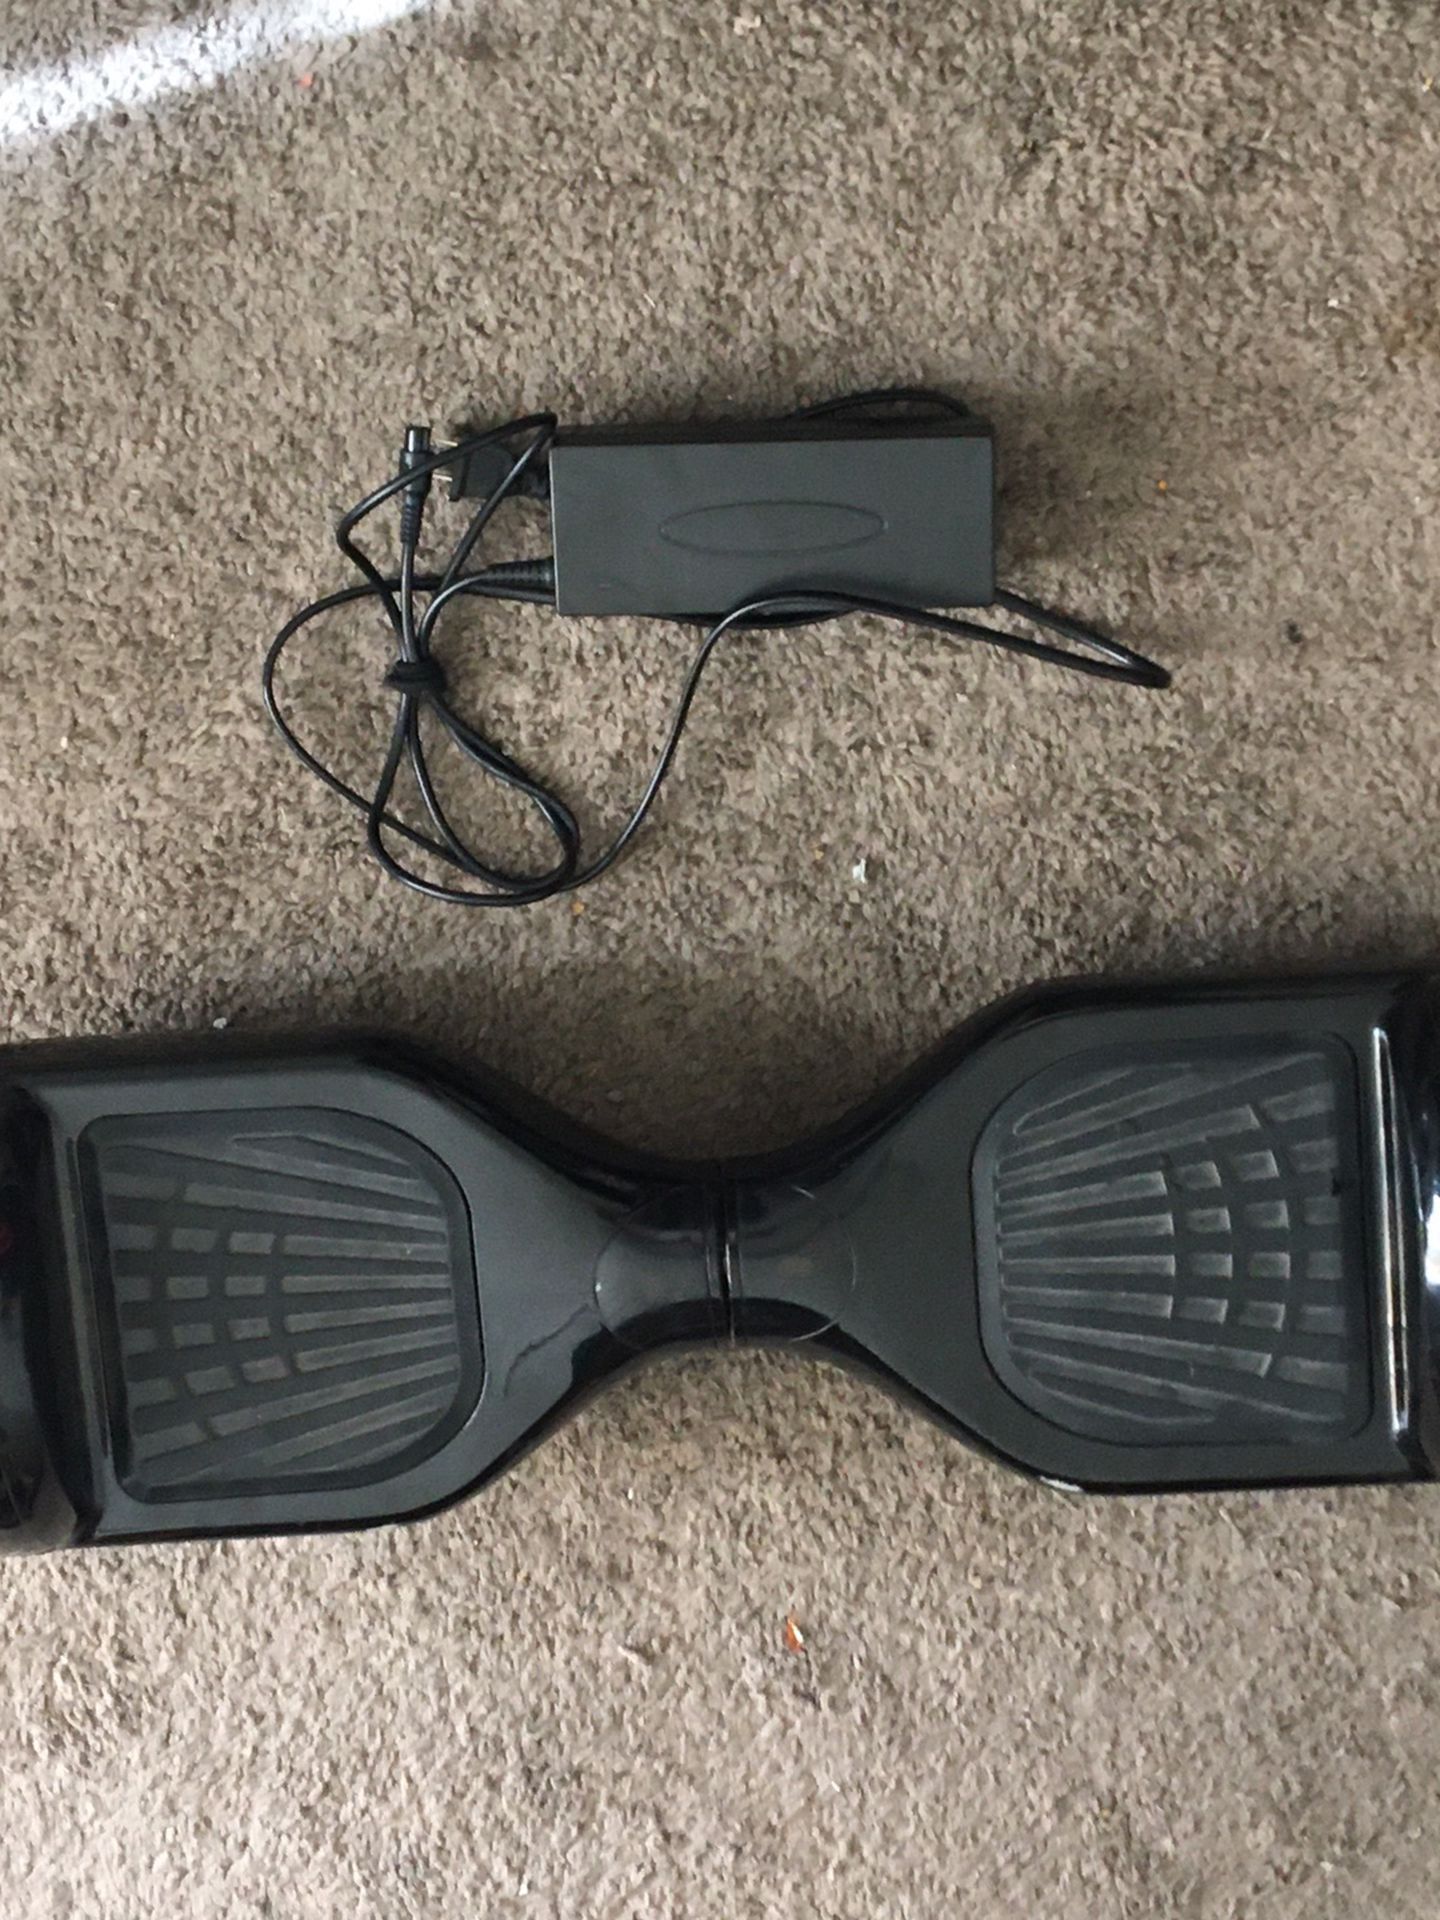 Quality HOVERBOARD for Sale - Charger Included